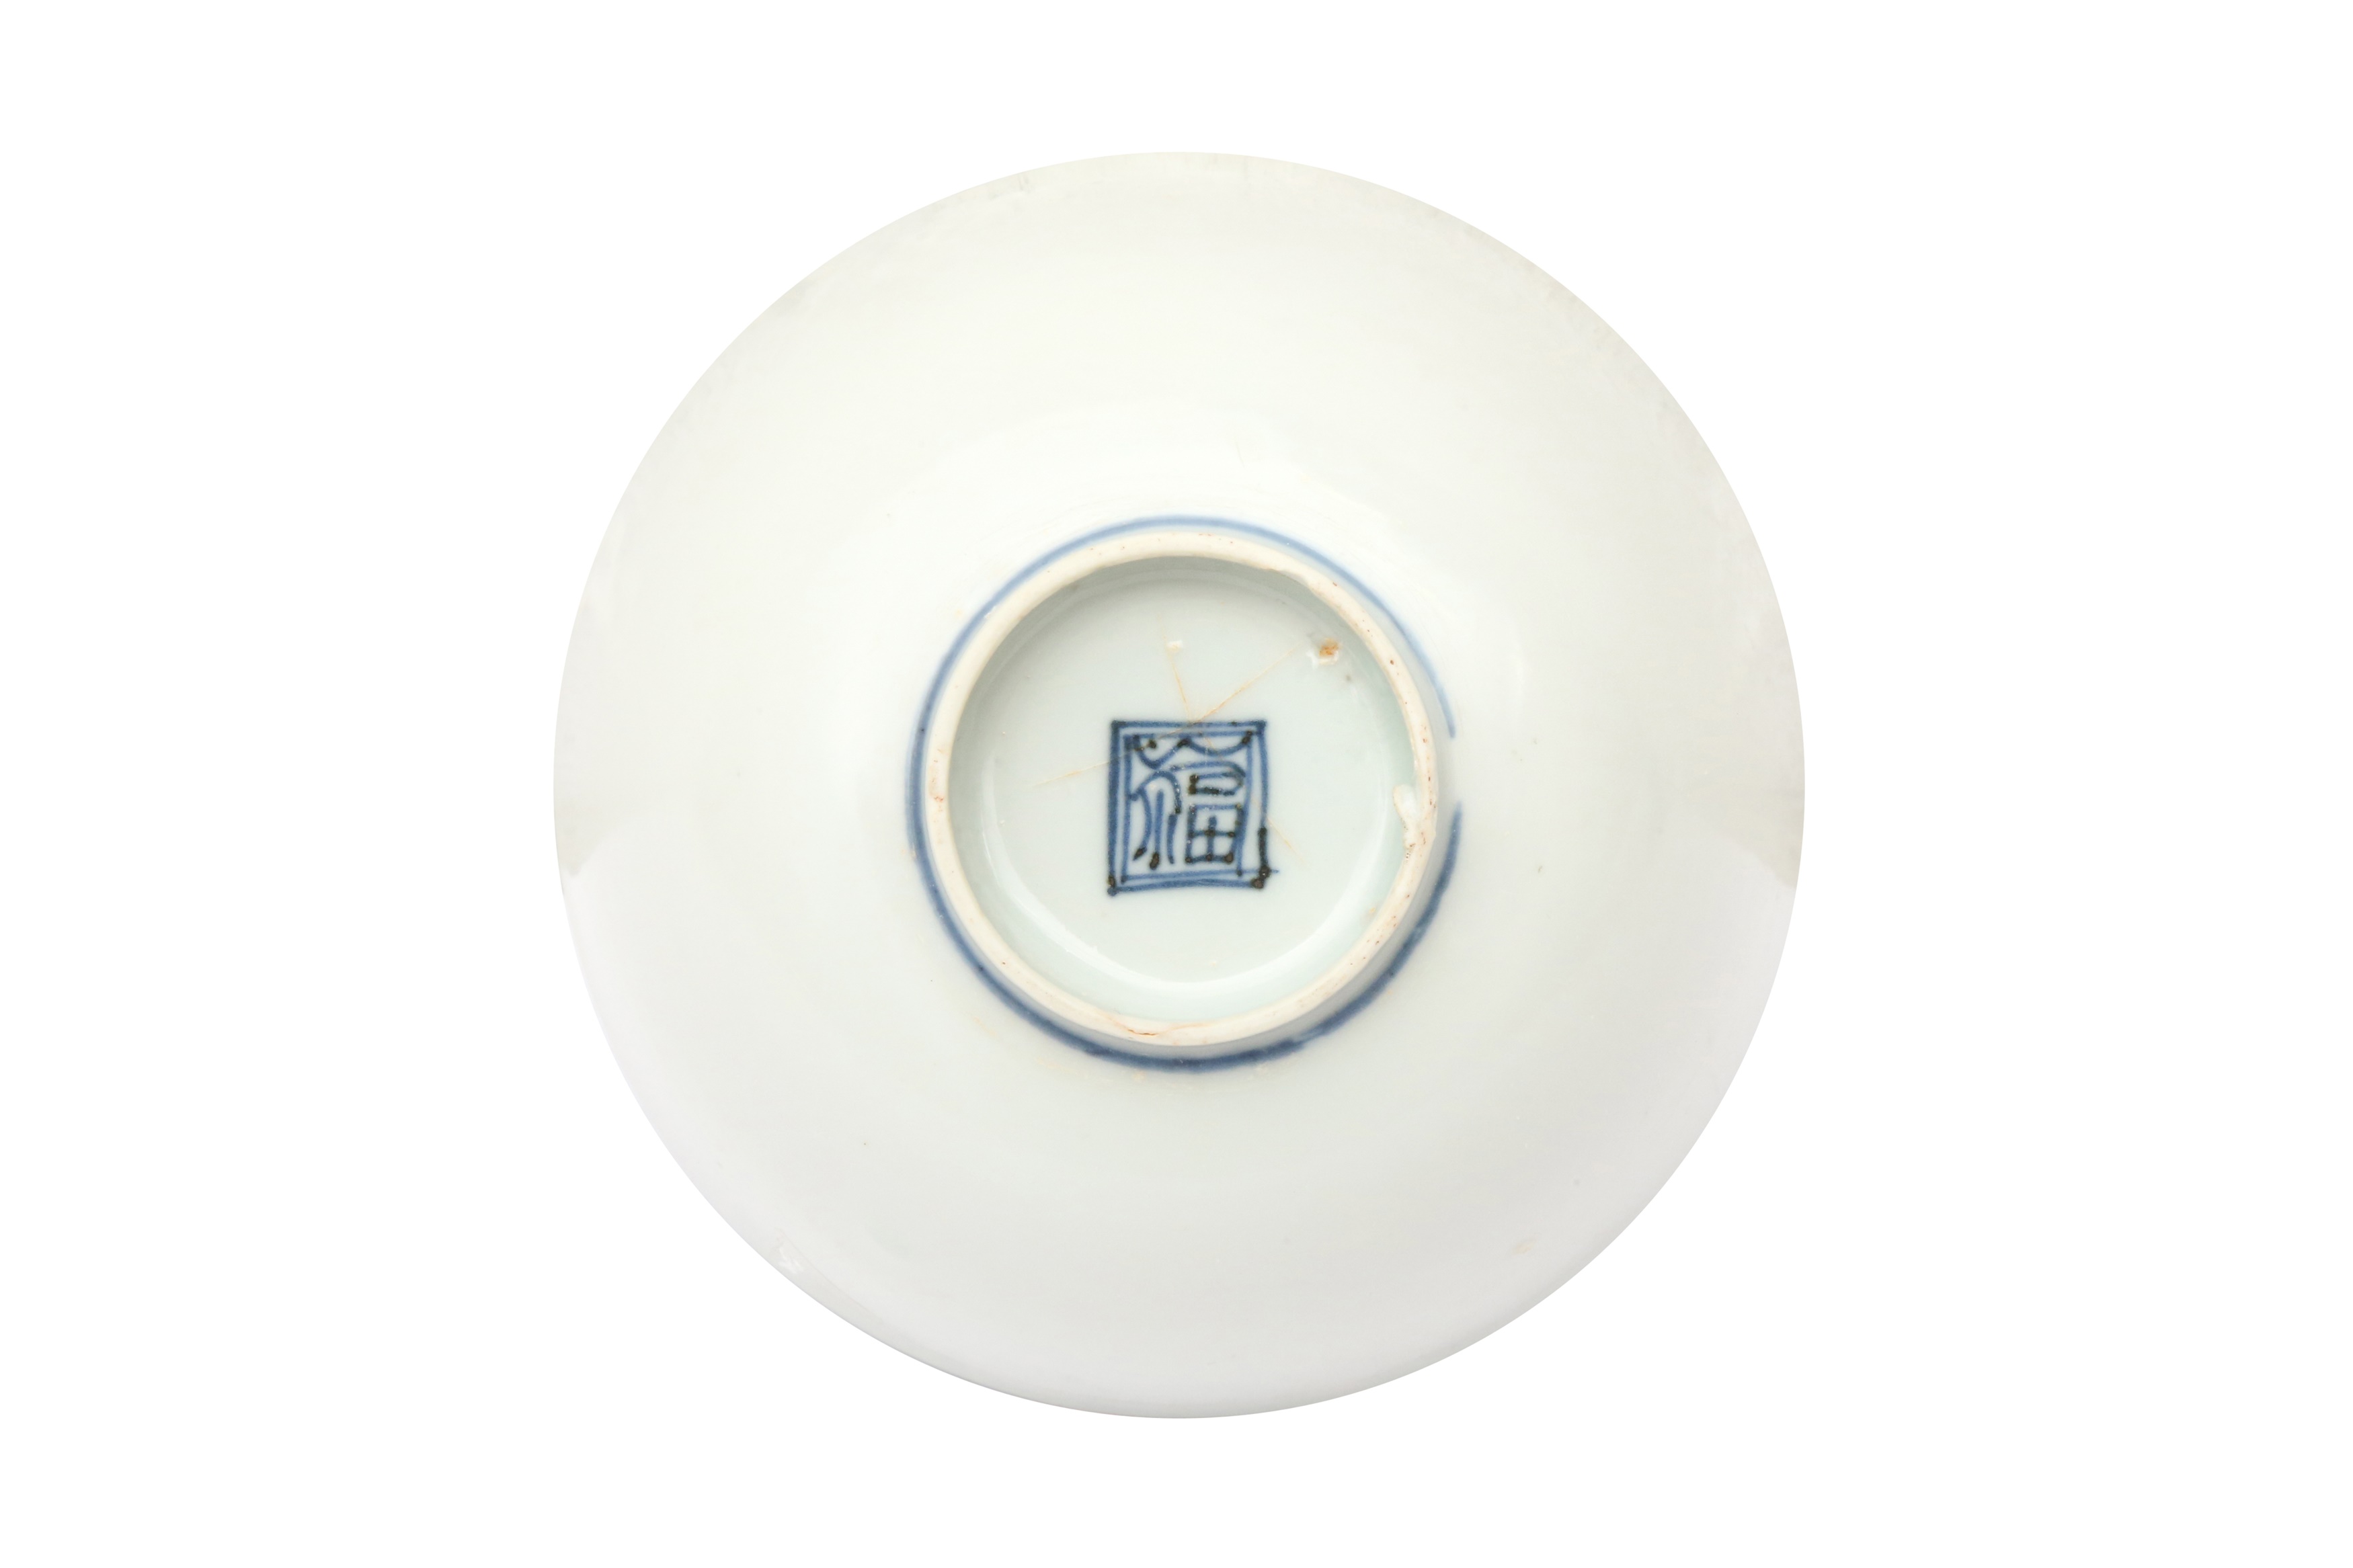 A CHINESE BLUE AND WHITE 'CRANES' BOWL 明 青花鶴紋盌 《福》款 - Image 3 of 11